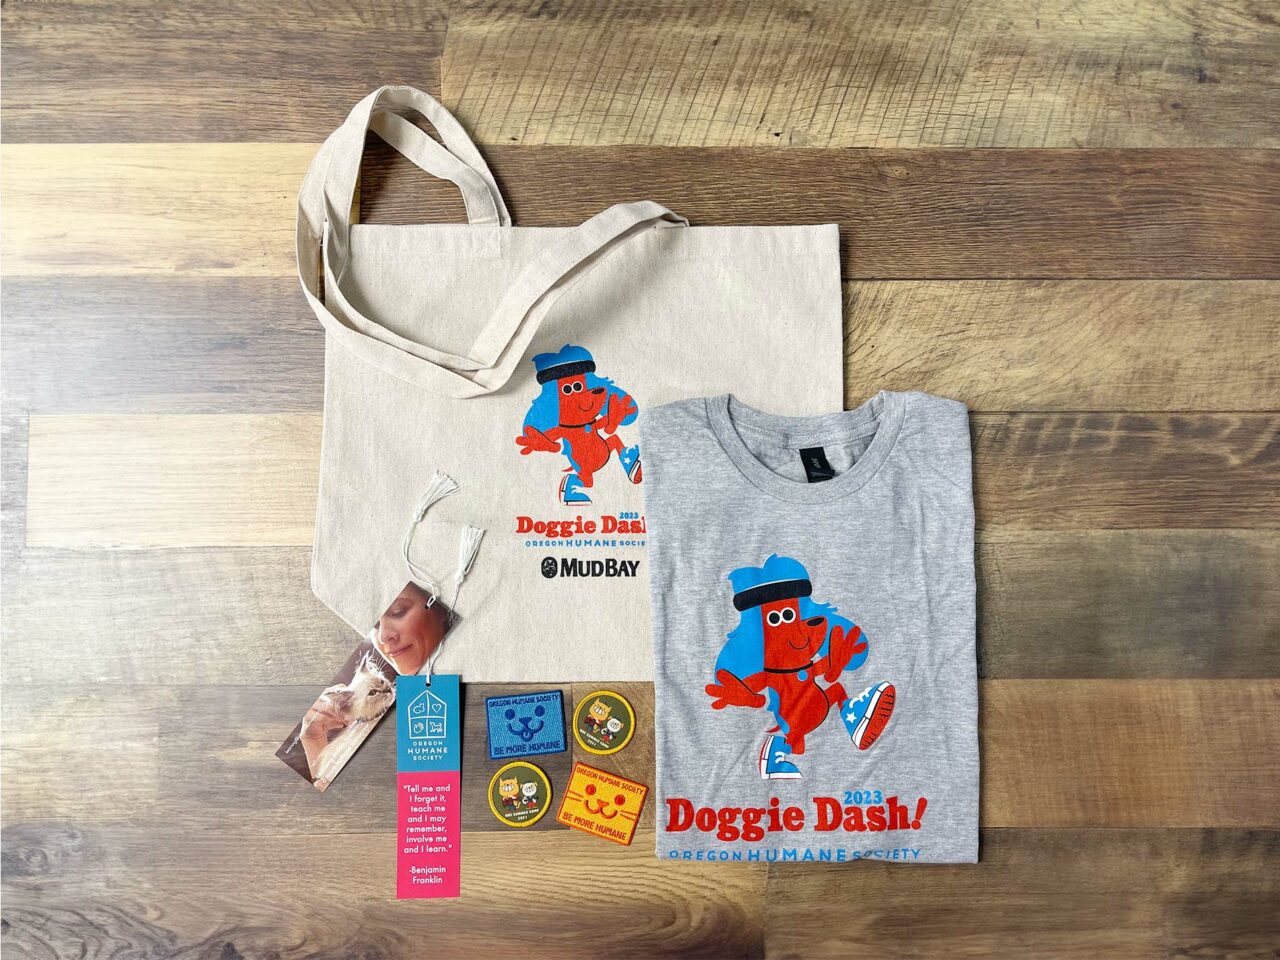 Example of Morel's promotional and apparel capabilities, showing a branded tote bag, t-shirt, bookmarks, and embroidered patches for the Doggie Dash.